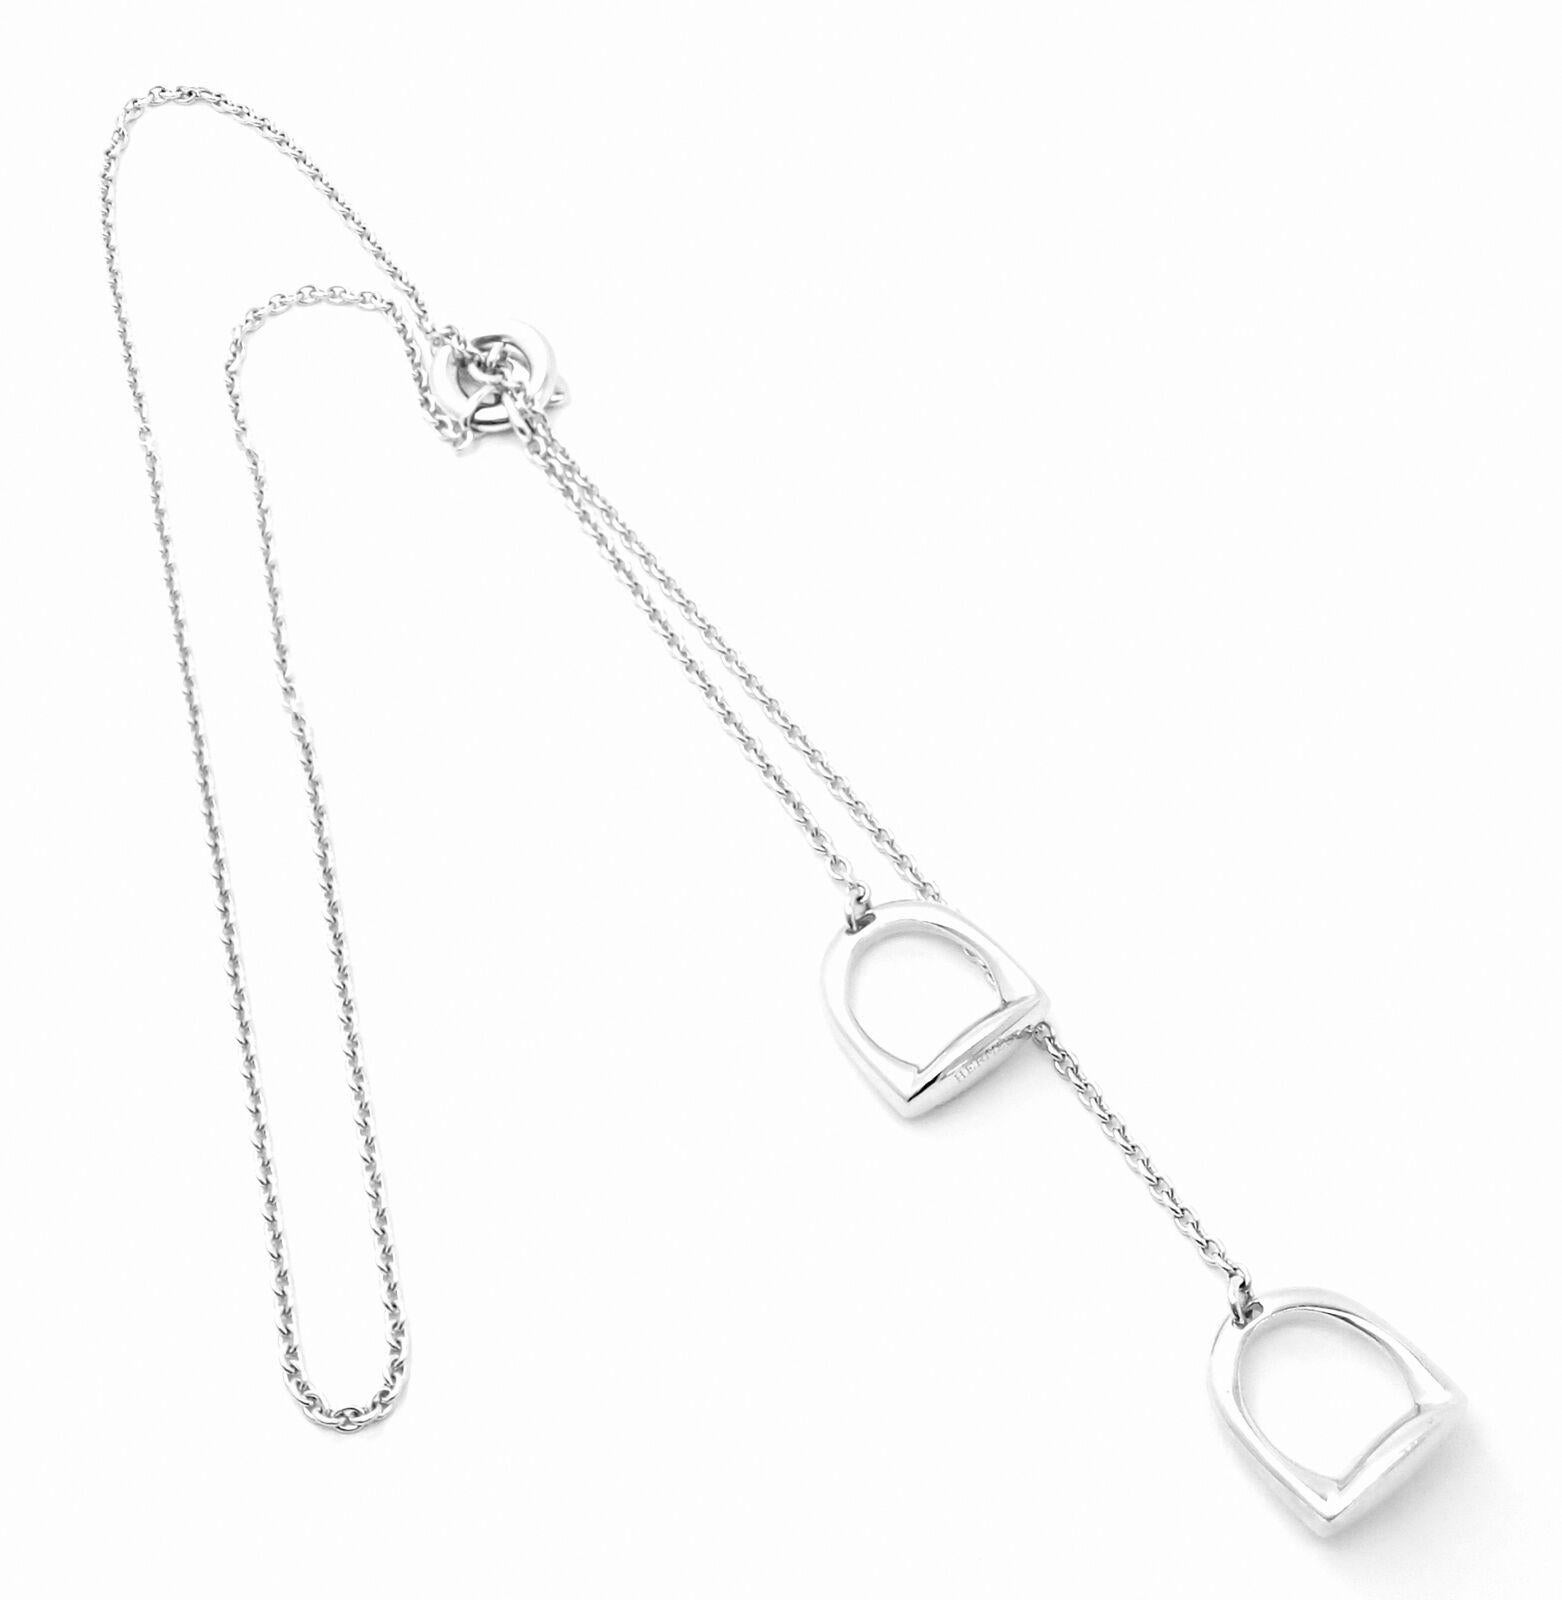 Hermes Stirrup Lariat White Gold Link Chain Necklace 2